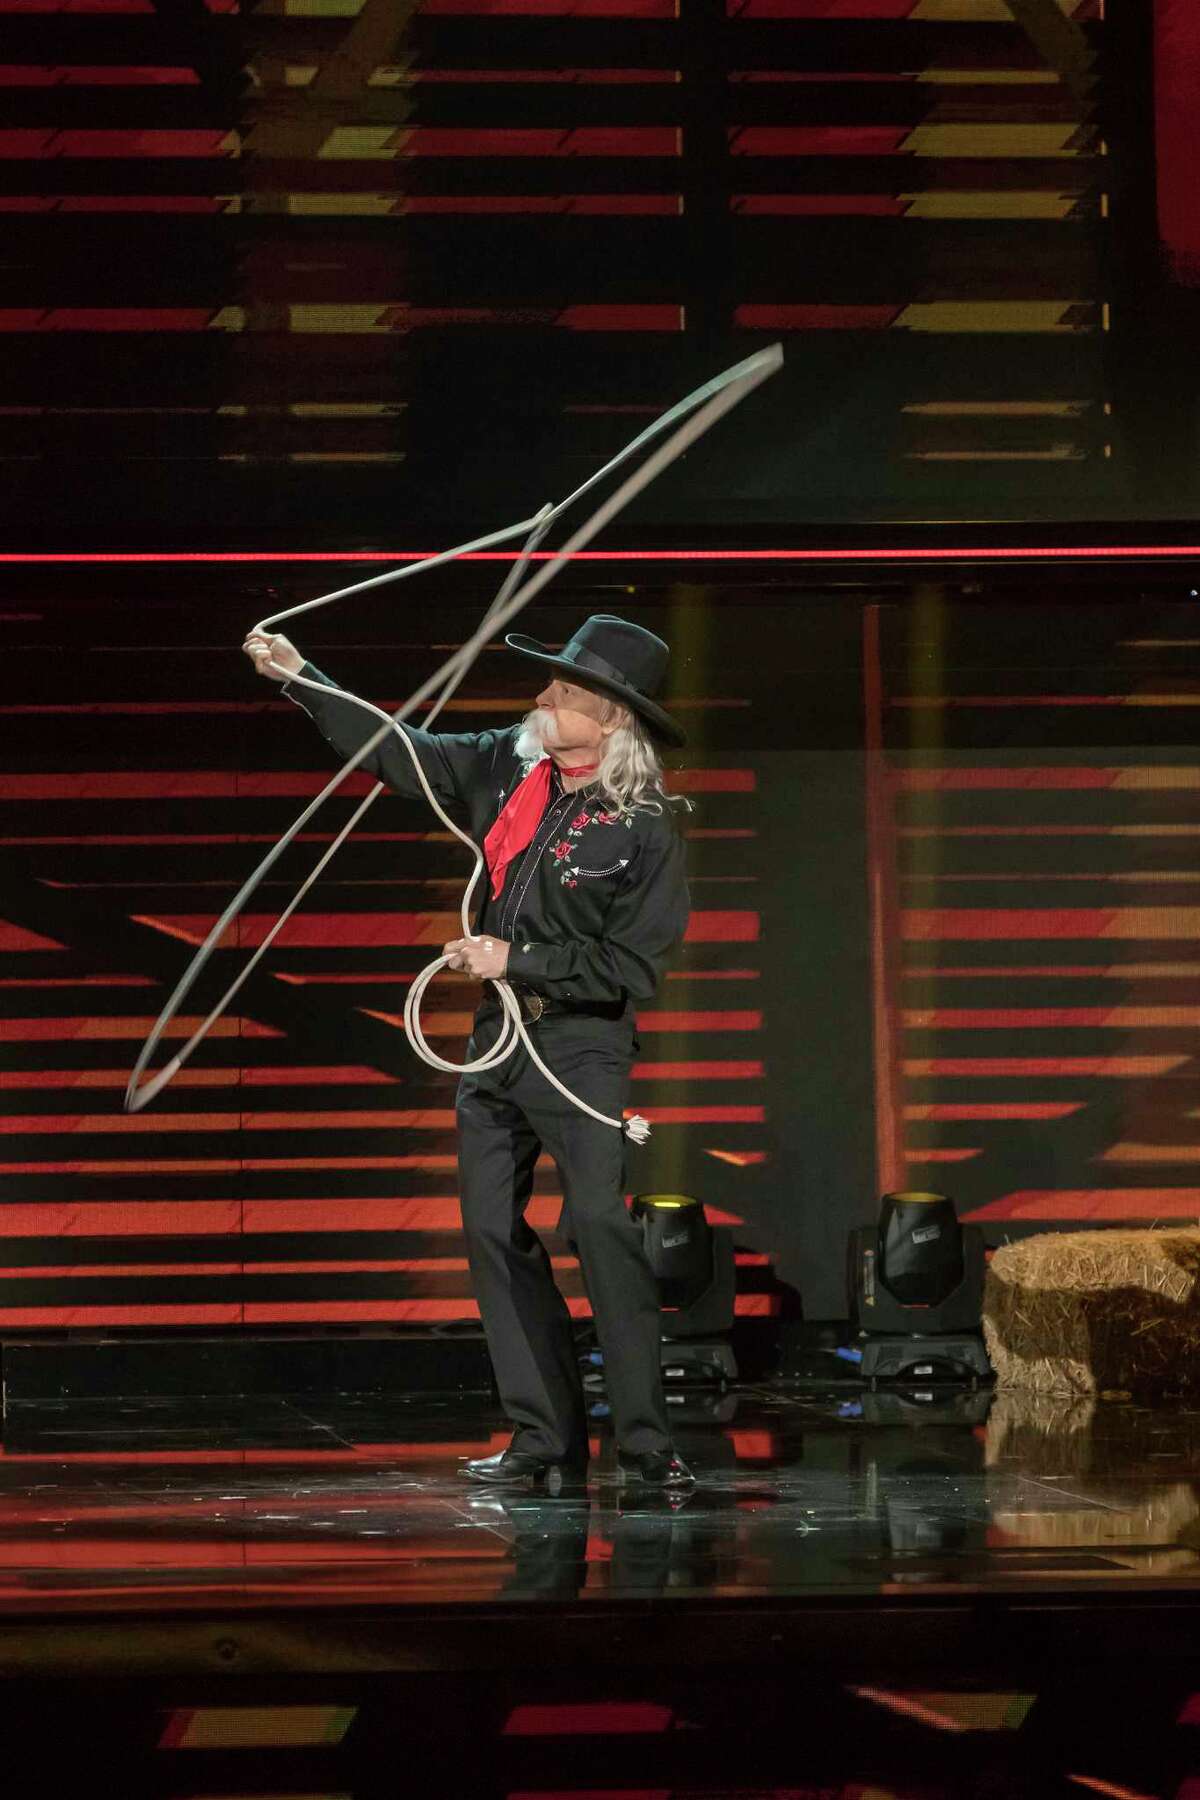 Beaumont-native Chris McDaniel will appear on the NBC programÂ Â?“Little Big Shots: Forever Young" on Feb. 26. The 61-year-old is a Wild West showman and a world champion trick roper.